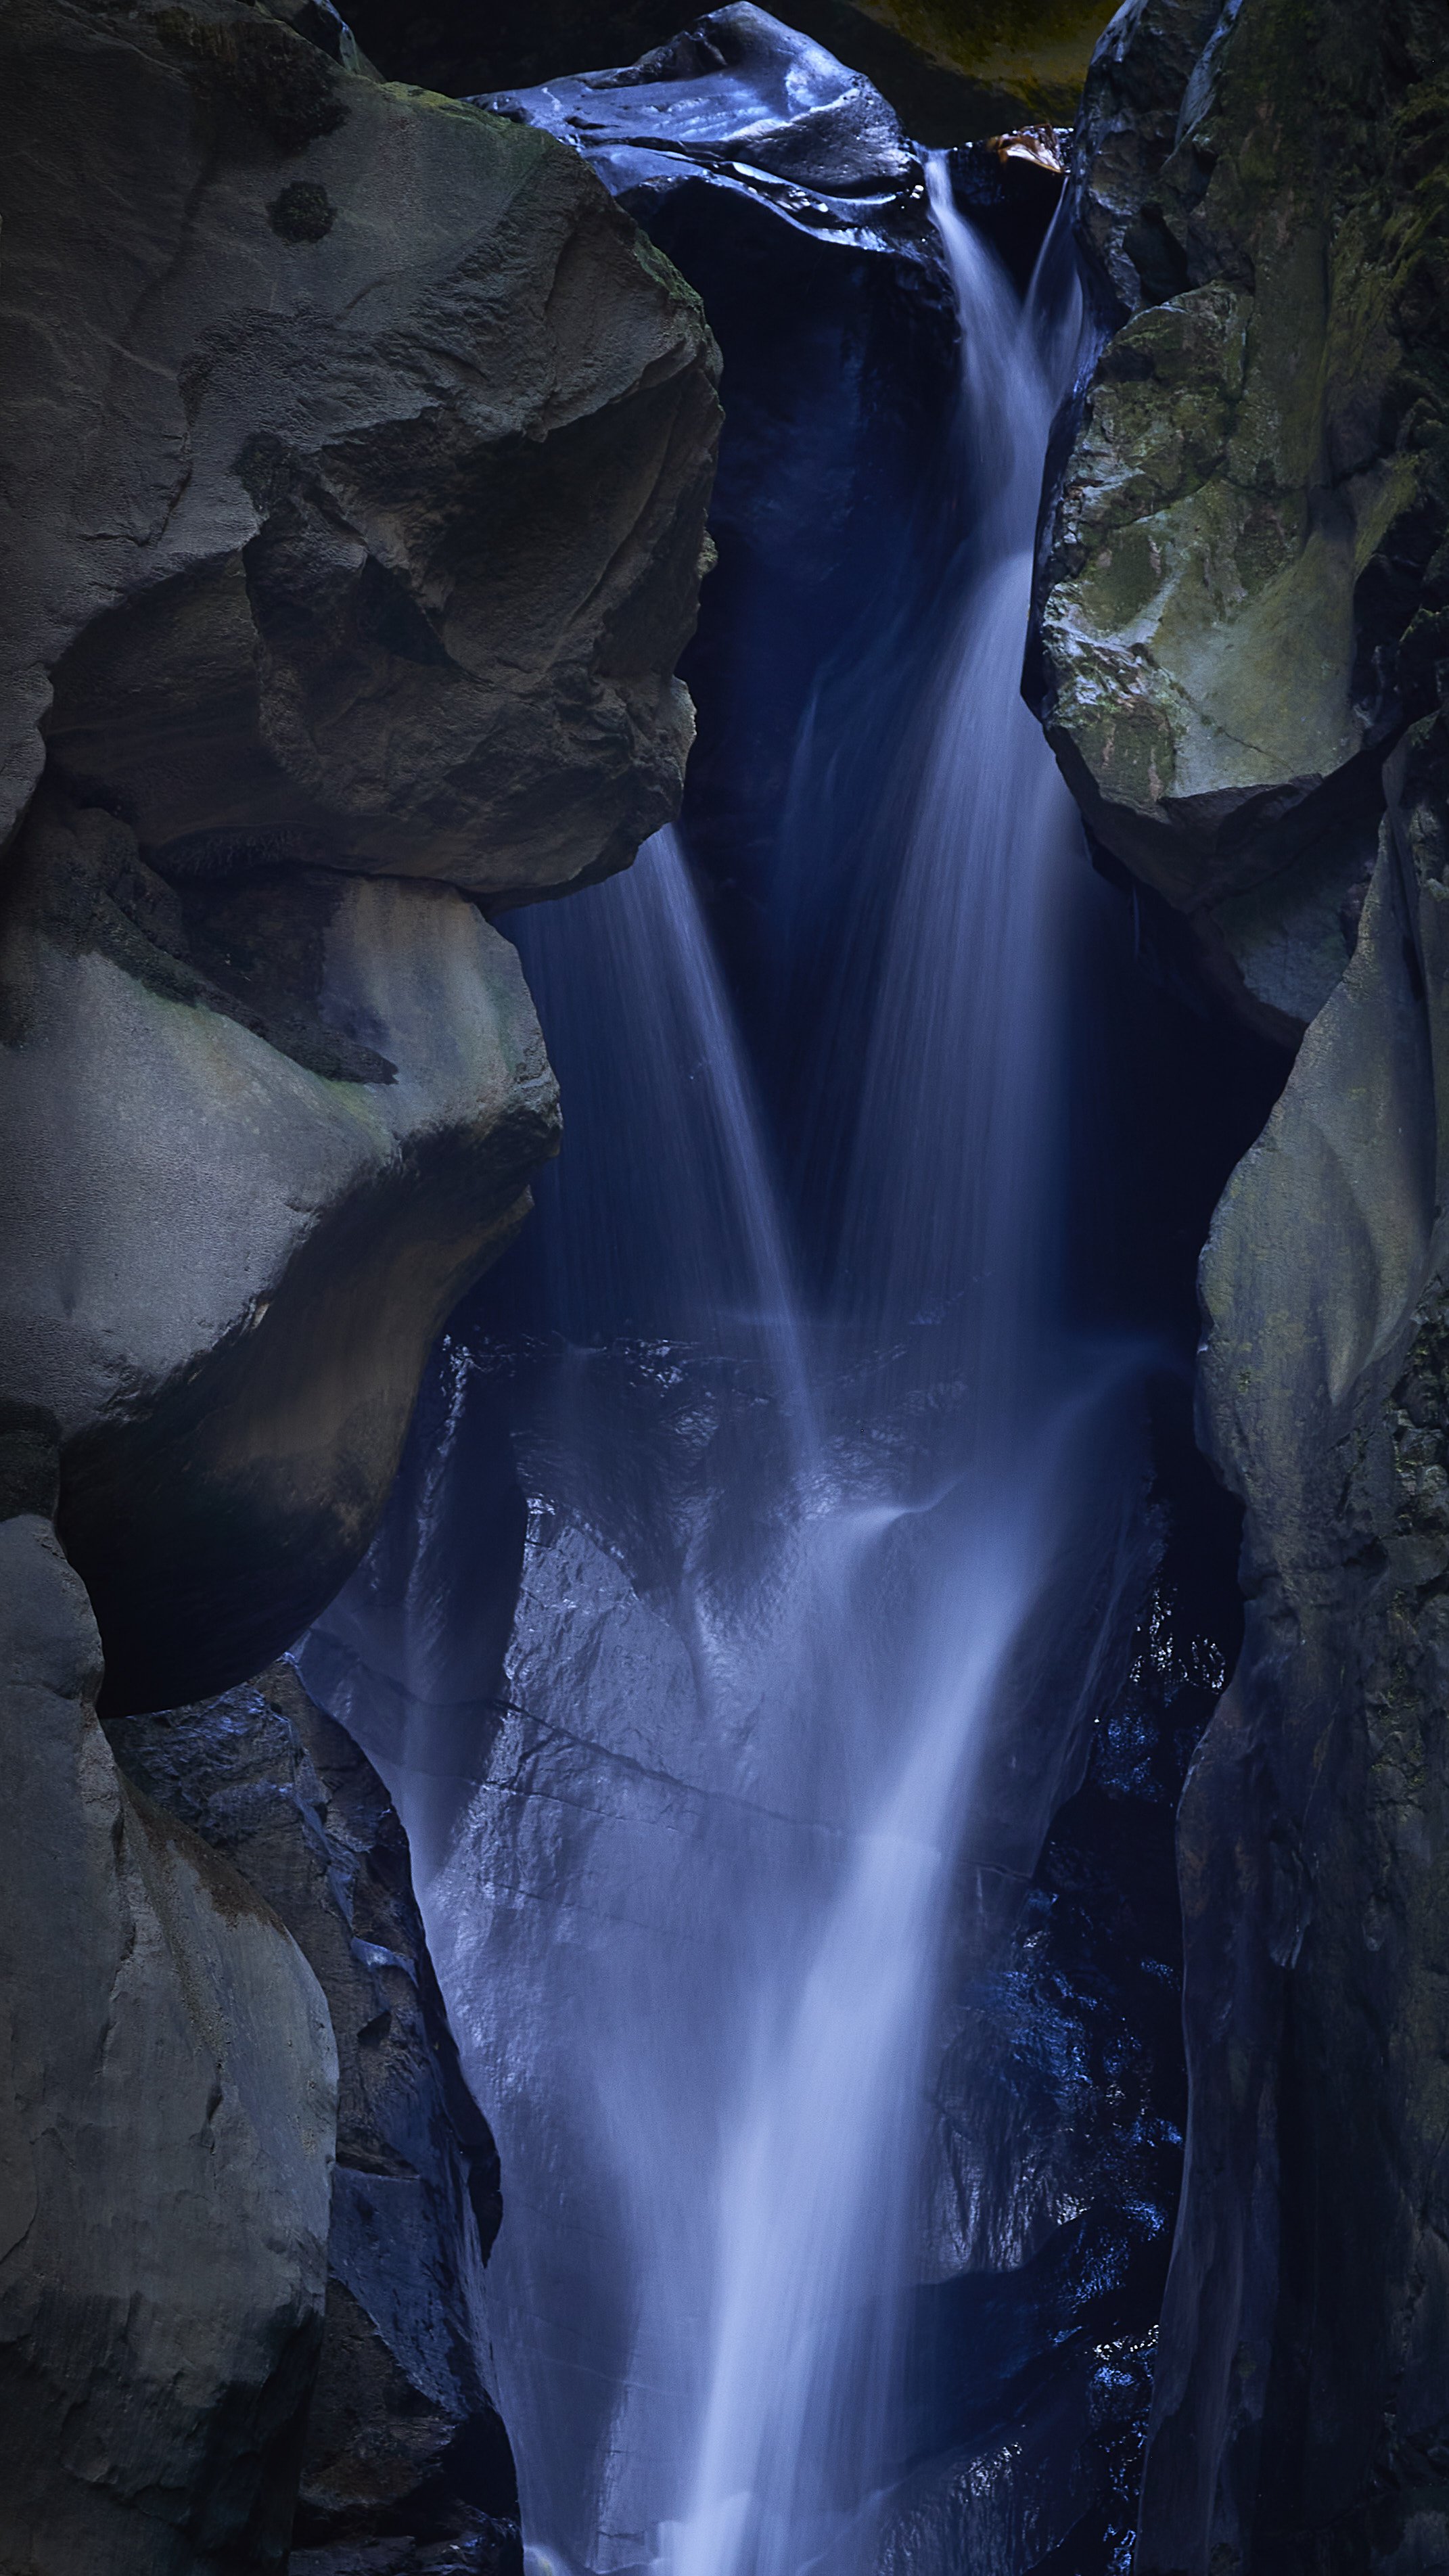 Cabrito Waterfall Closeup on Sao Miguel Island, Azores by Greg Frucci